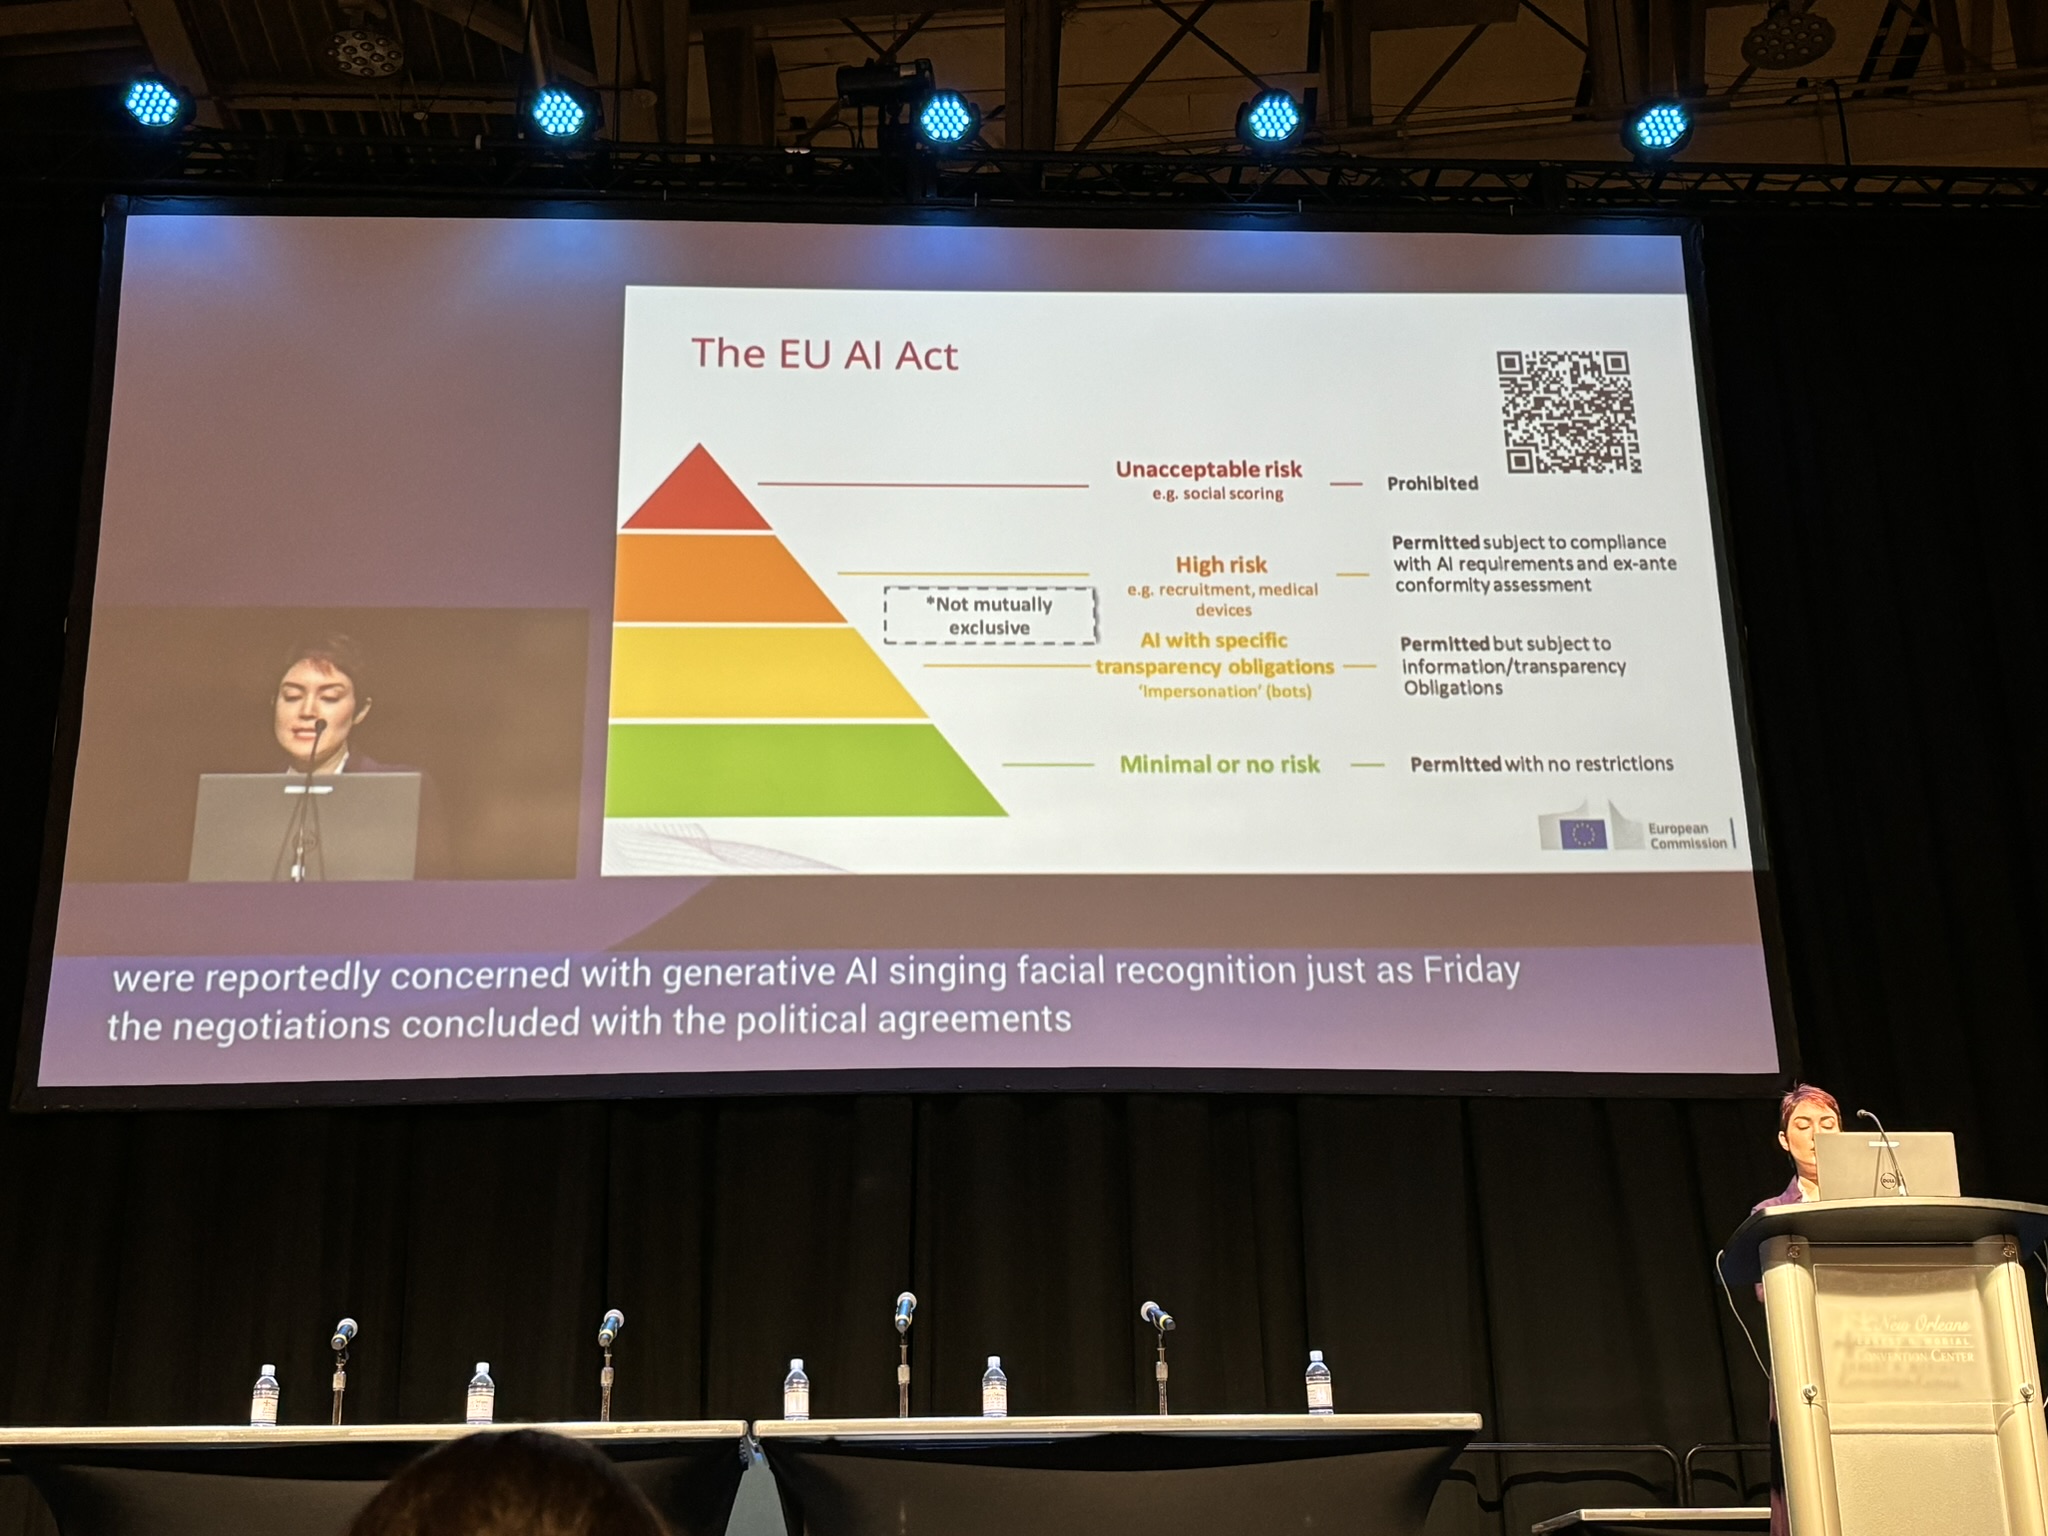 A slide shwoing the risk levels in the EU AI Act